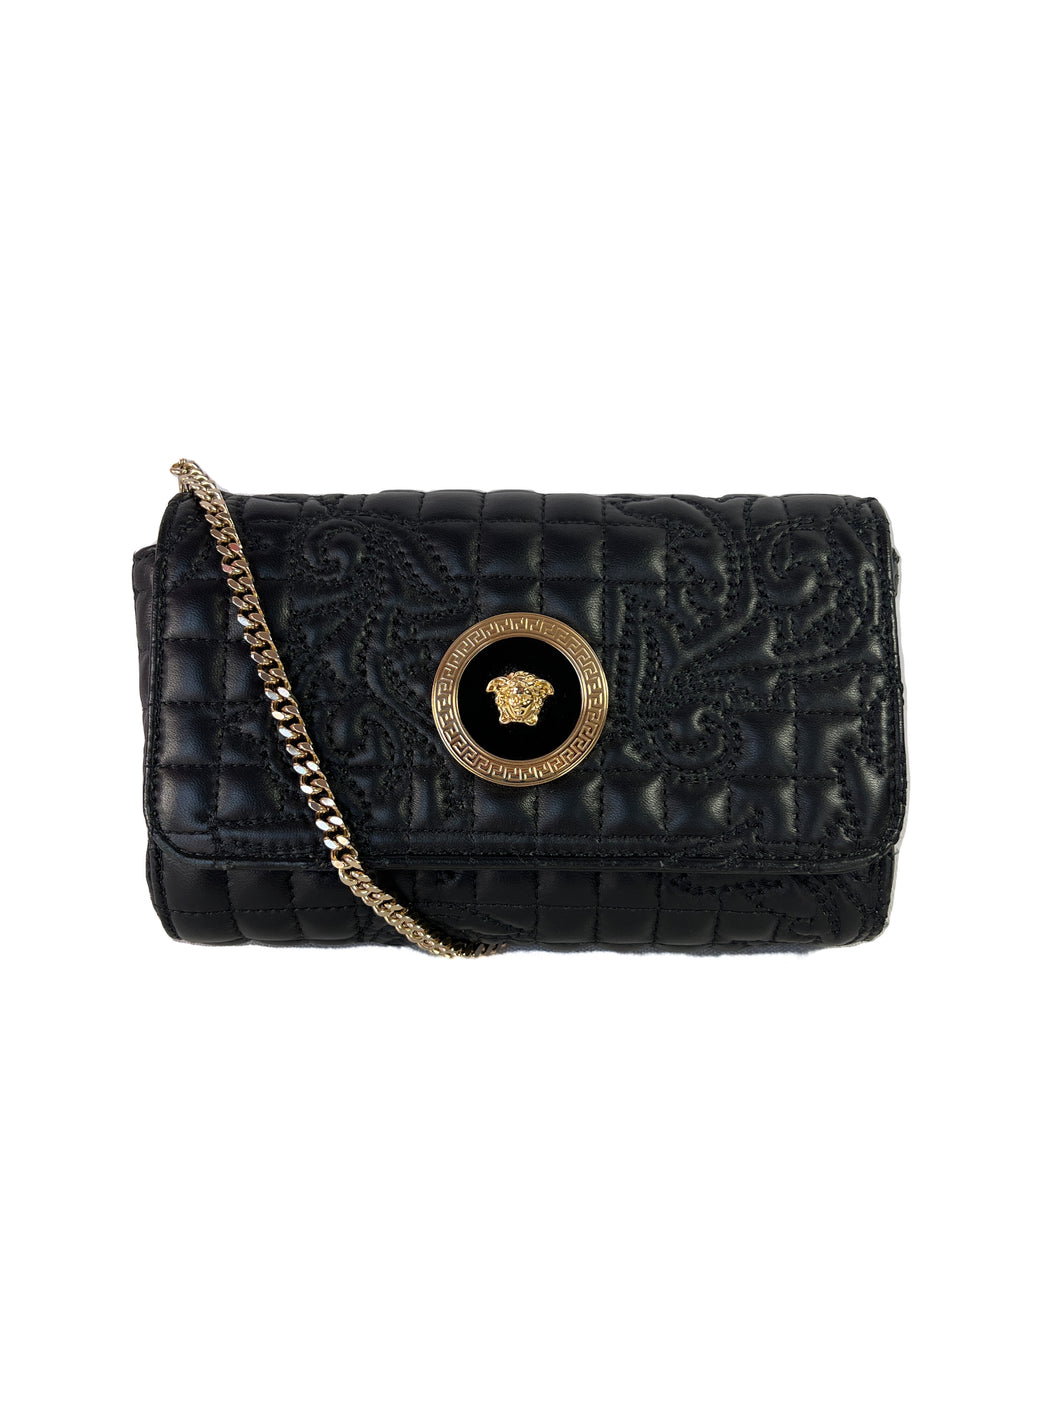 Versace black quilted leather mini crossbody